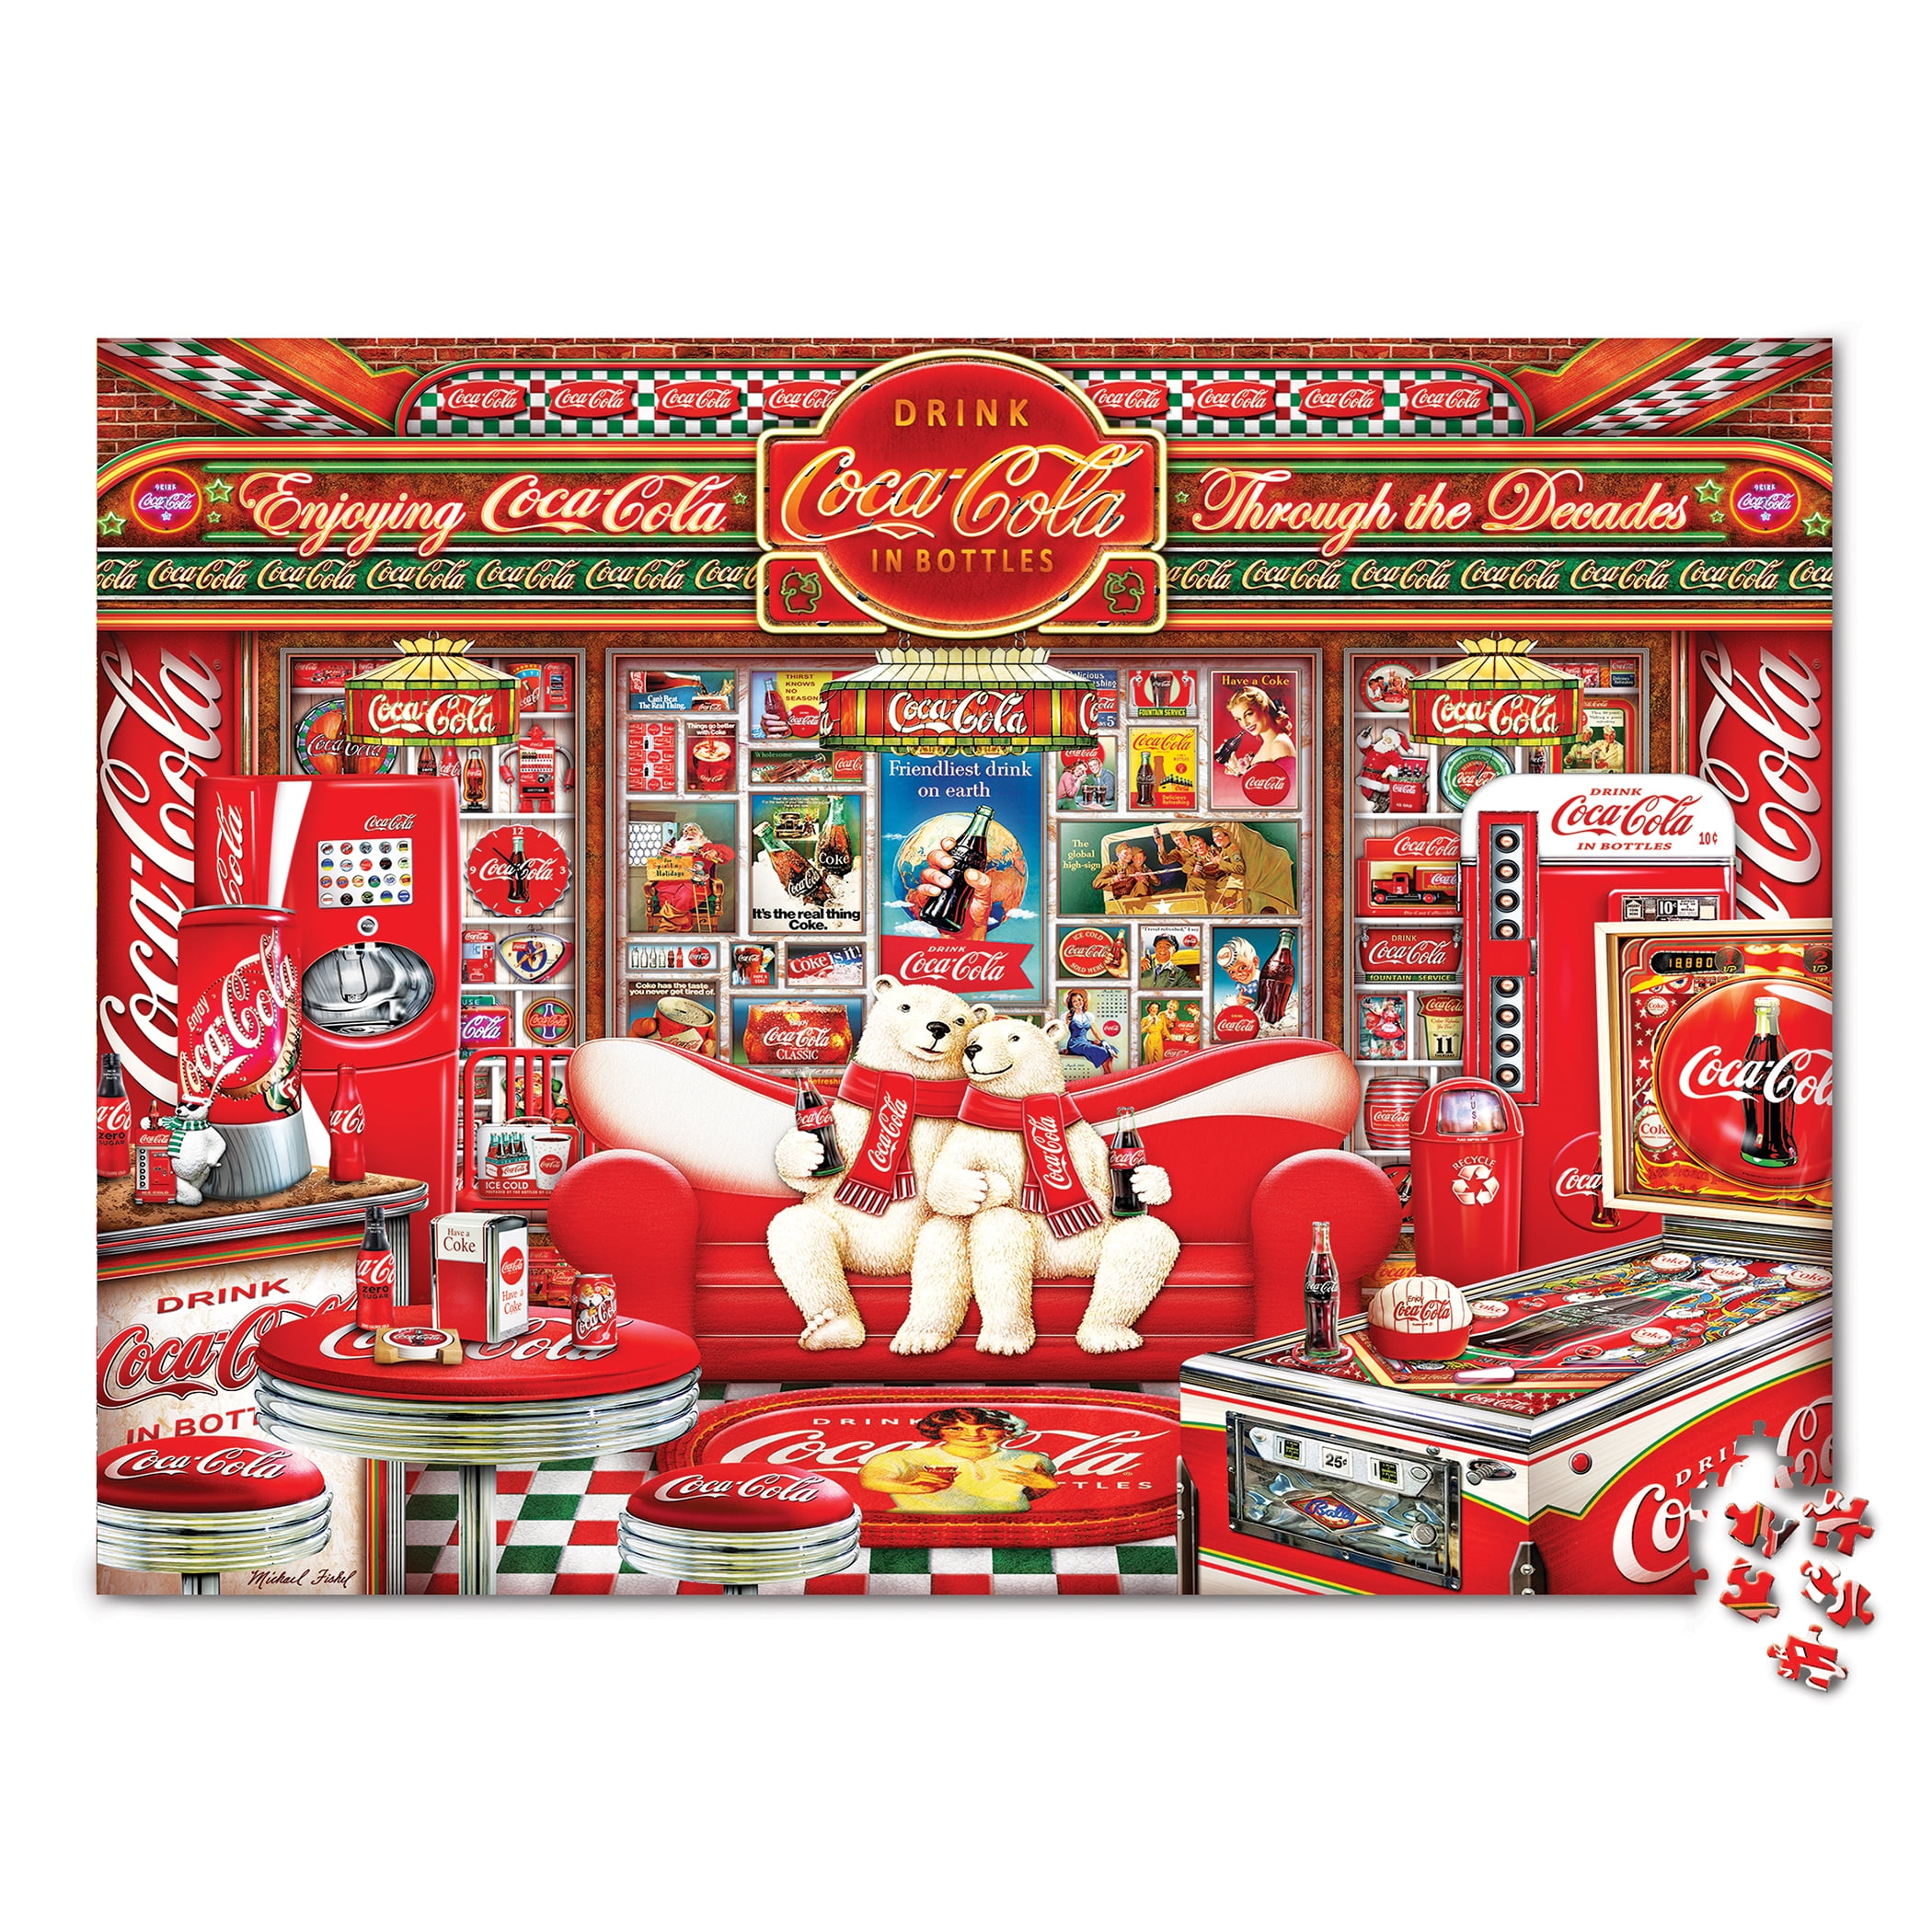 Springbok Puzzle Springtime Serenity Coca Cola Jigsaw Puzzle Made in USA Unique Cut Interlocking Pieces 500 Piece Jigsaw Puzzle Large 19 inches by 23.5 inches